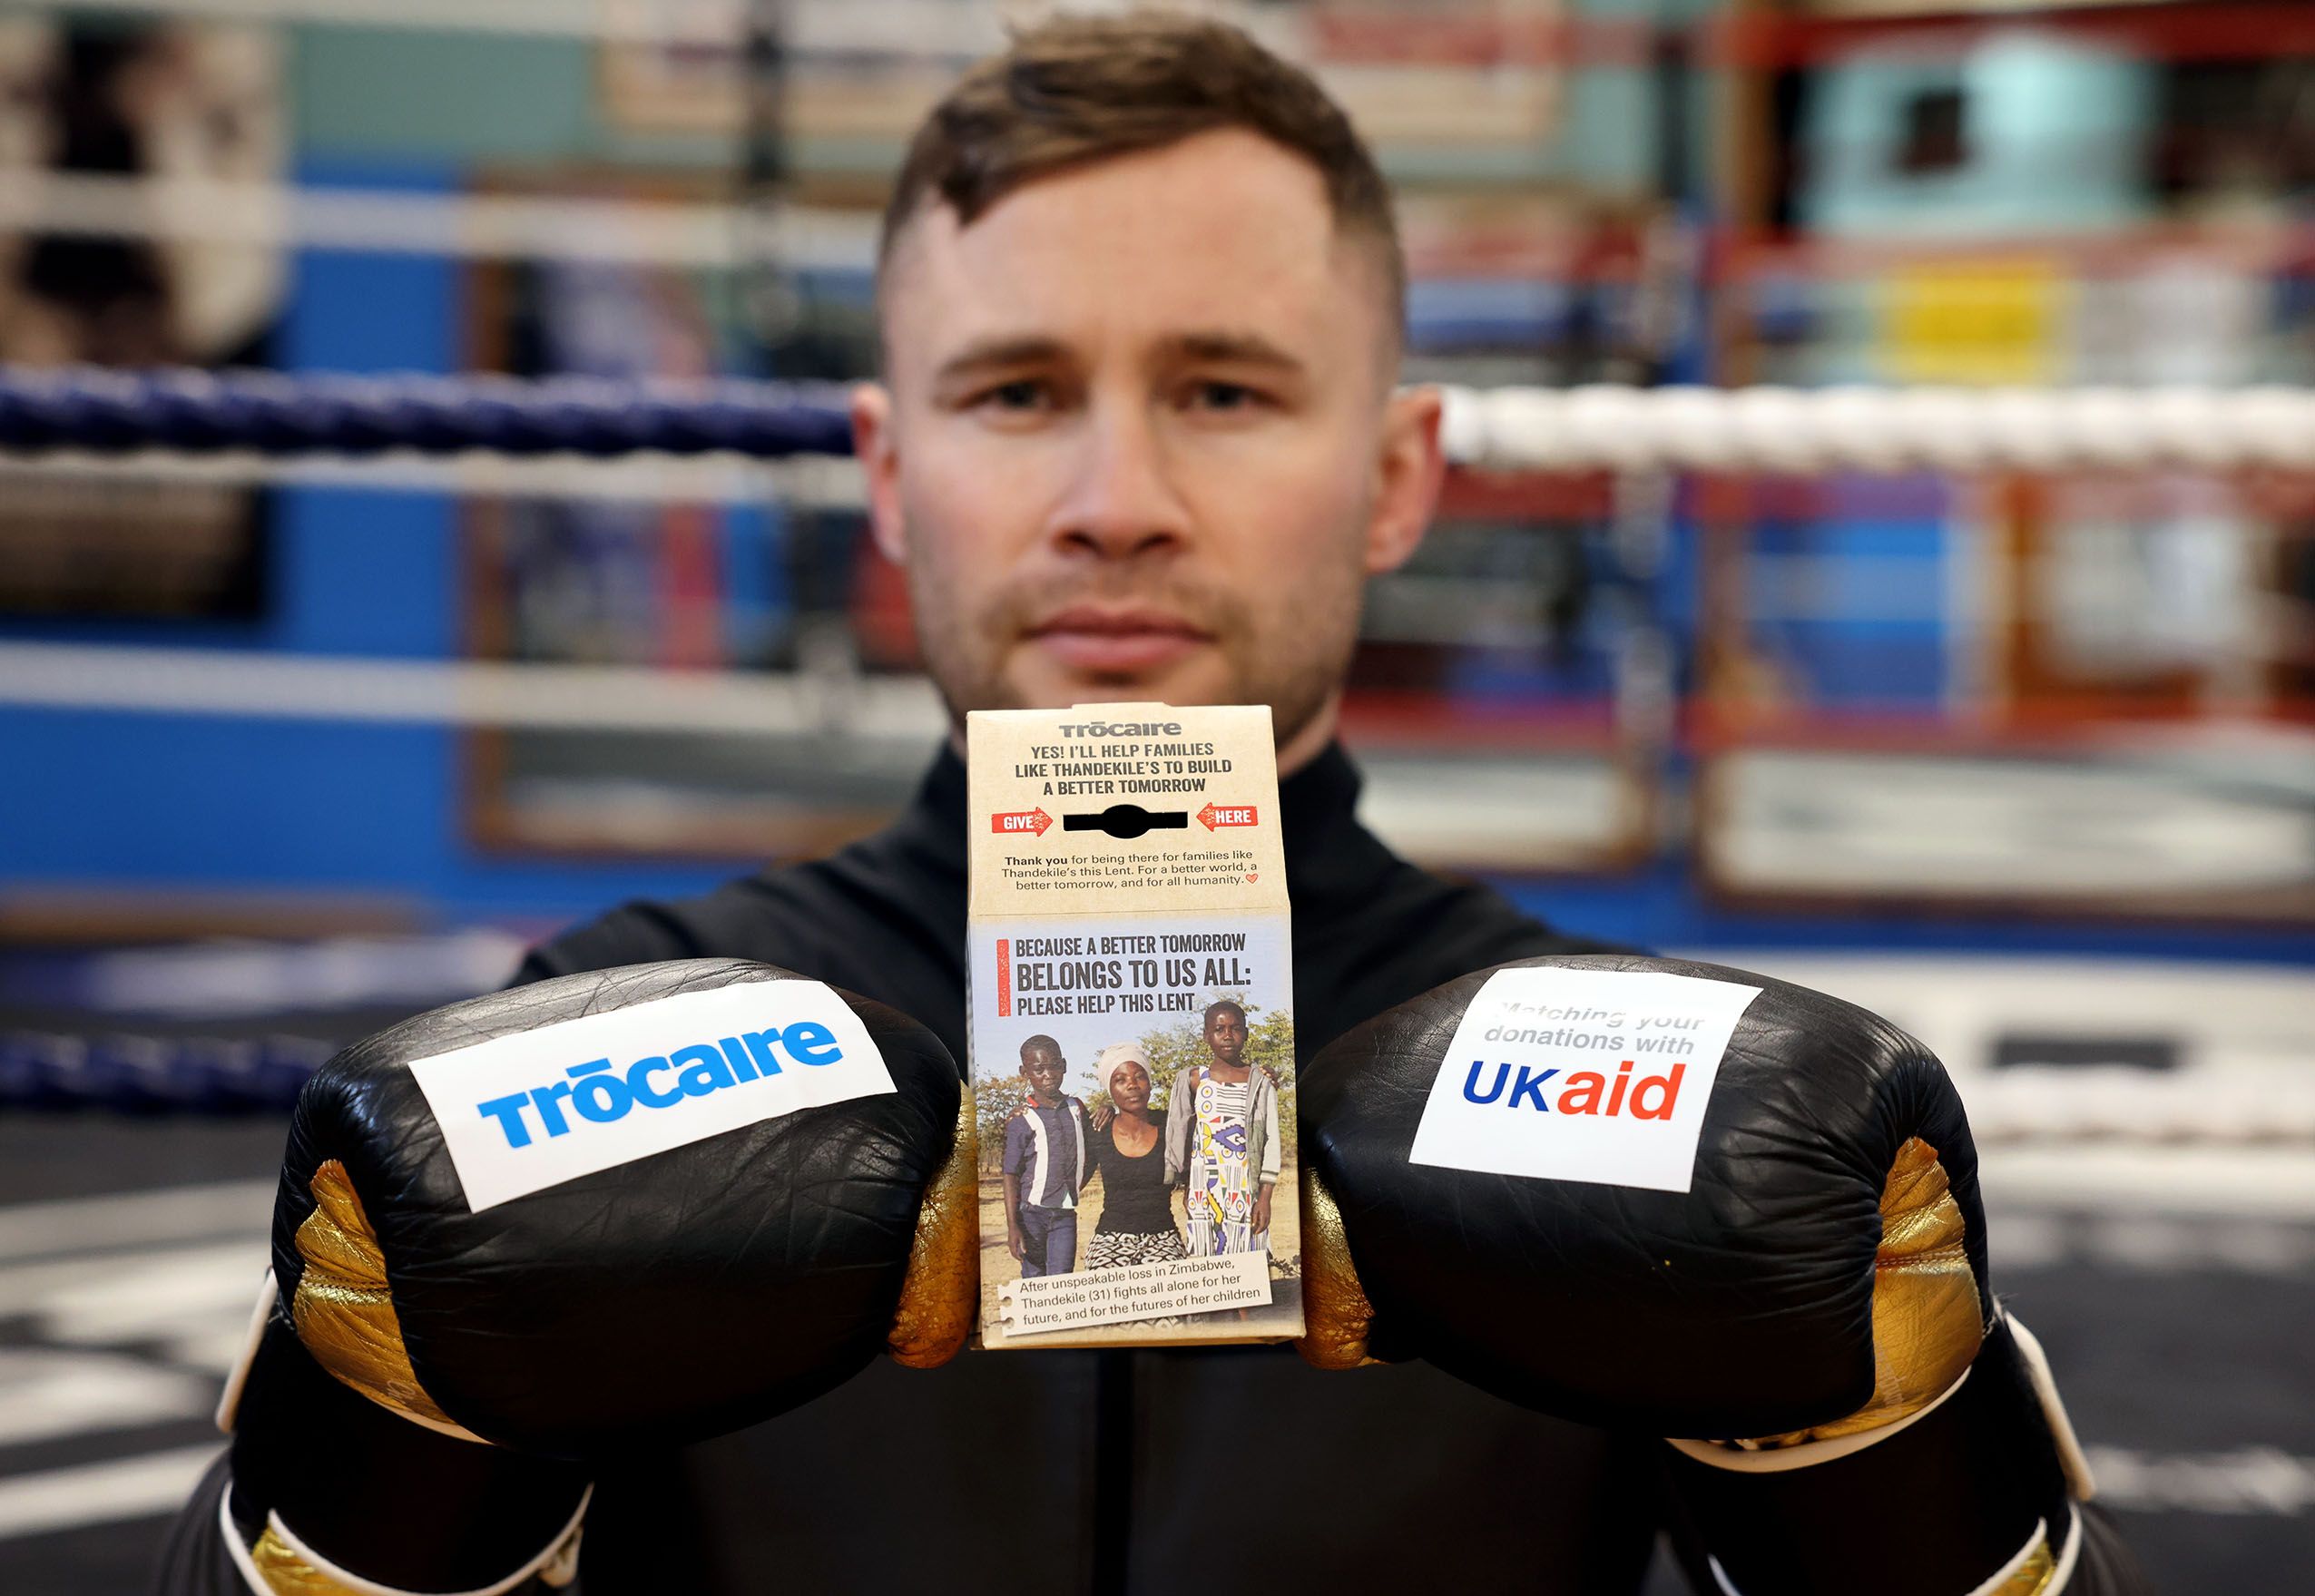 Trócaire ambassador and former two-weight world champion boxer Carl Frampton has urged people here to join the fight against climate change and Covid-19 in Zimbabwe as he launched the charity’s Lenten Appeal this week. The UK government will match public 